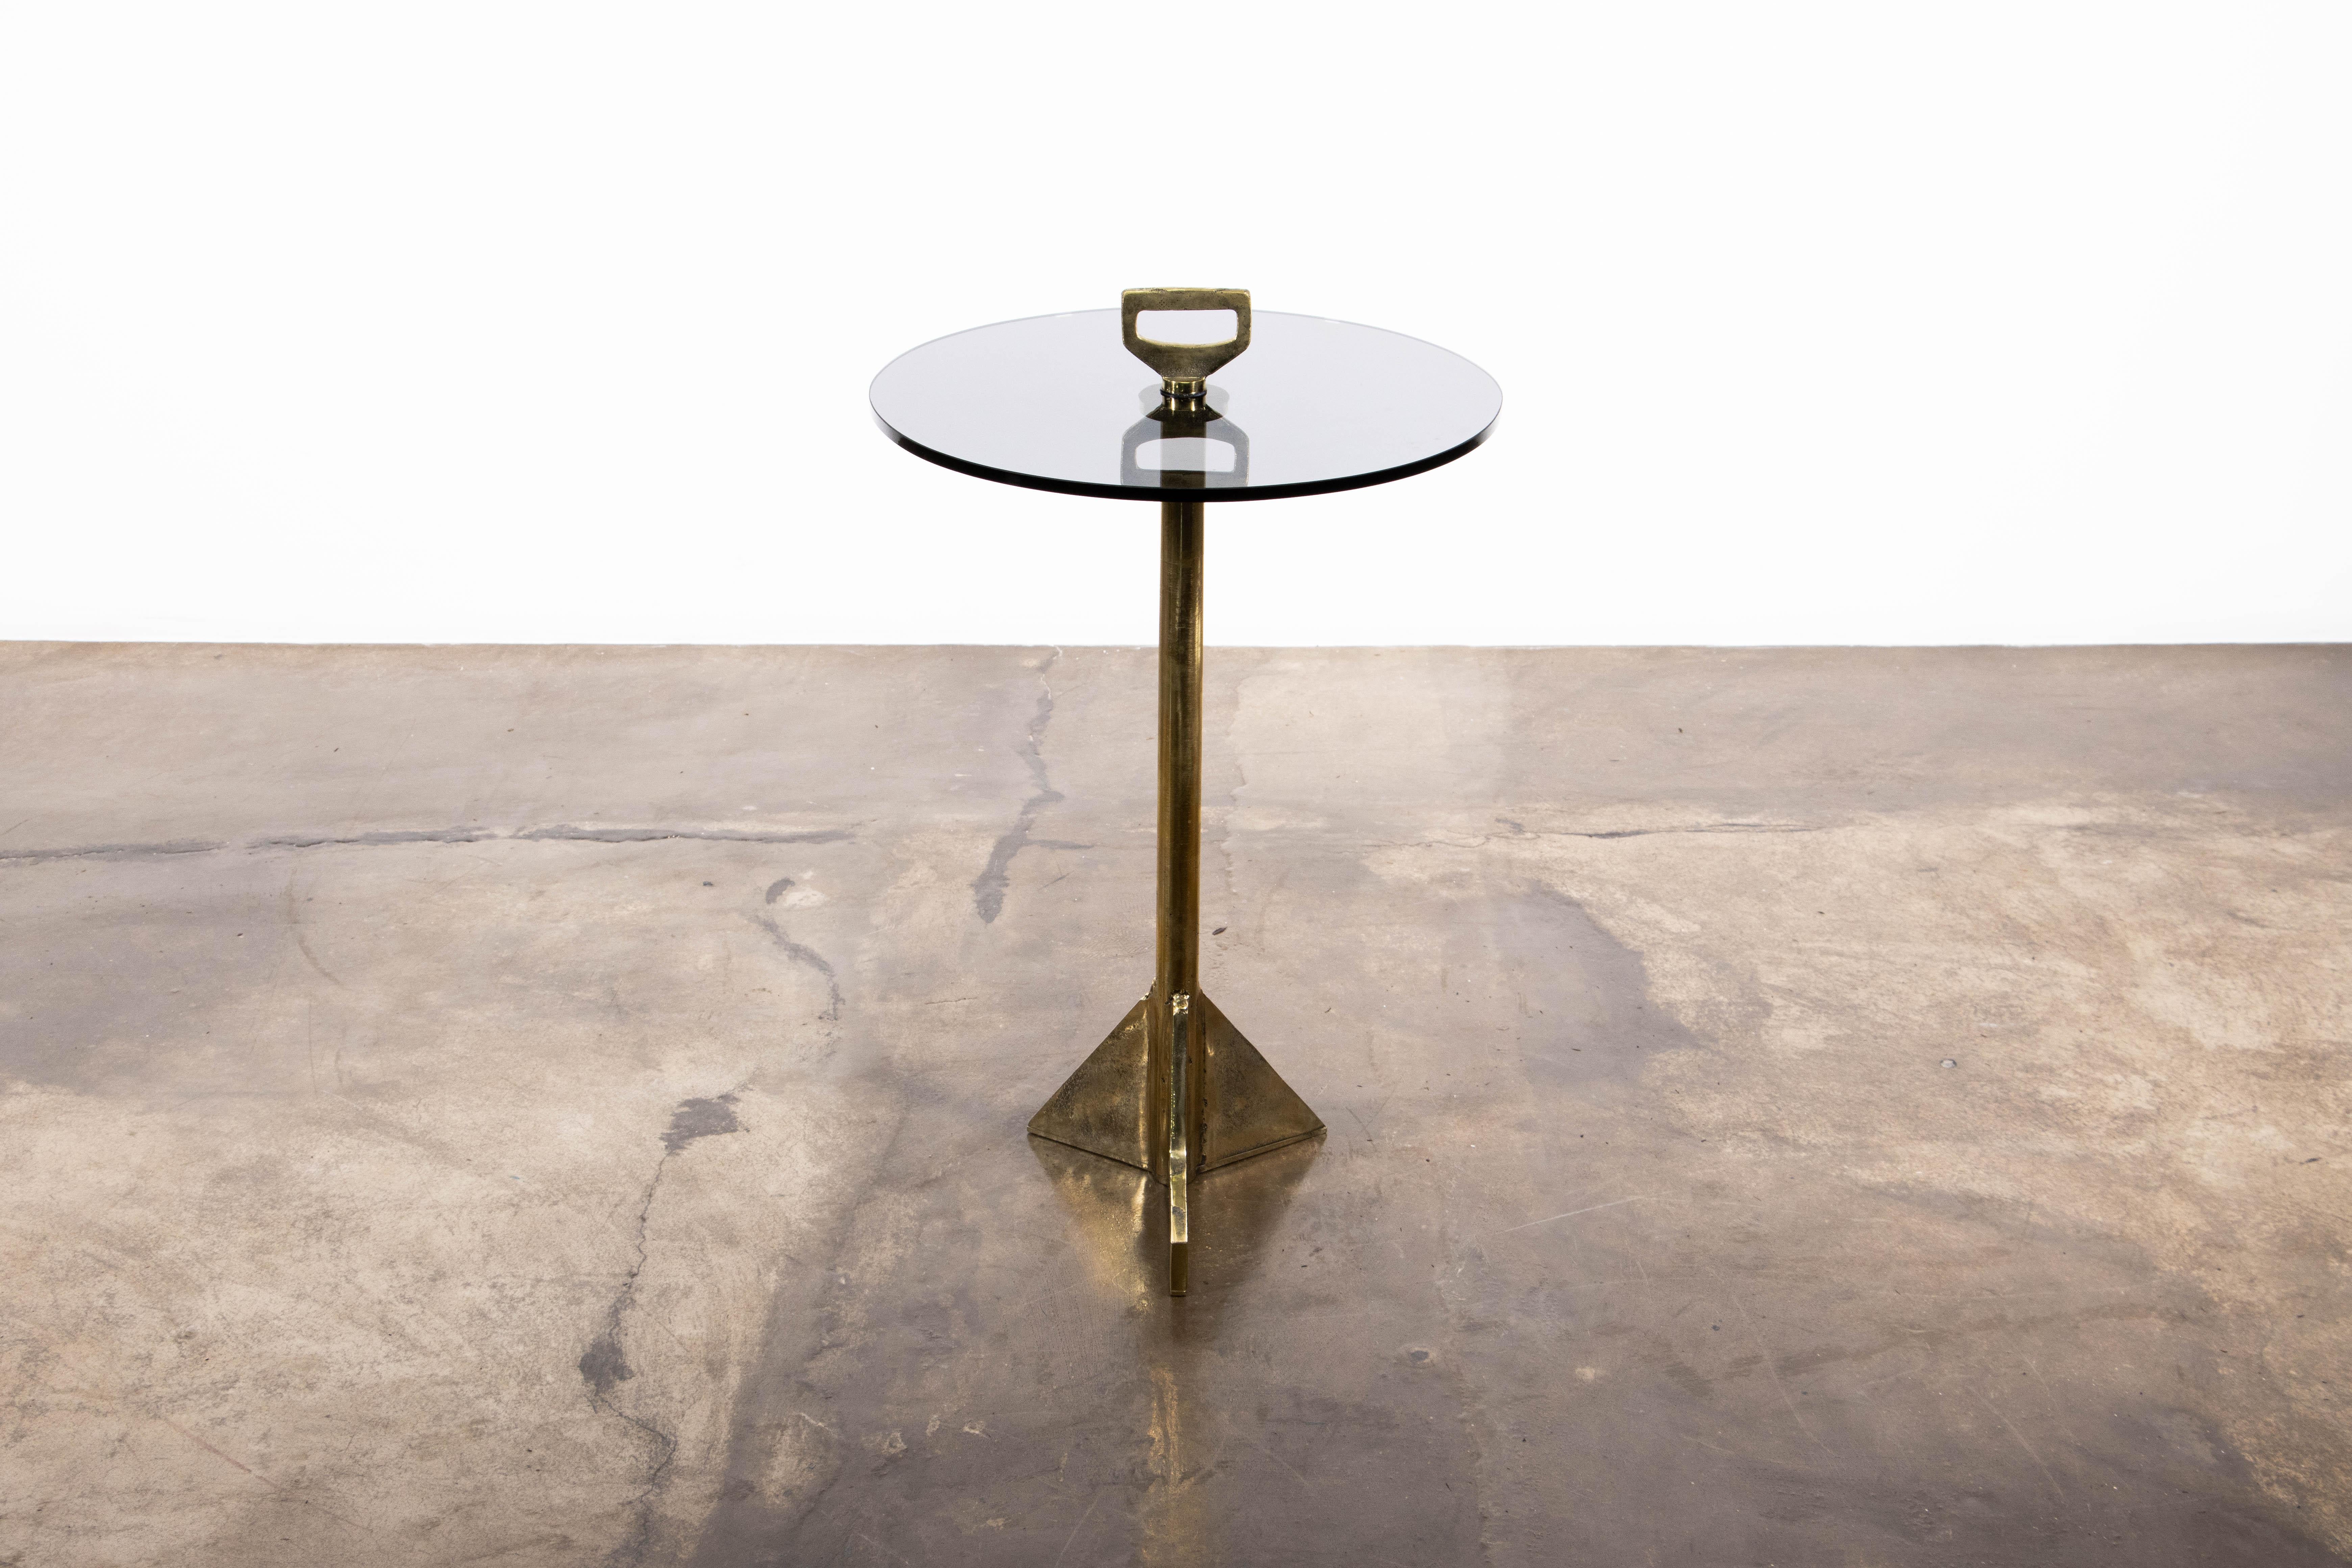 This playful table made of cast bronze and smoked glass features asymmetrical 